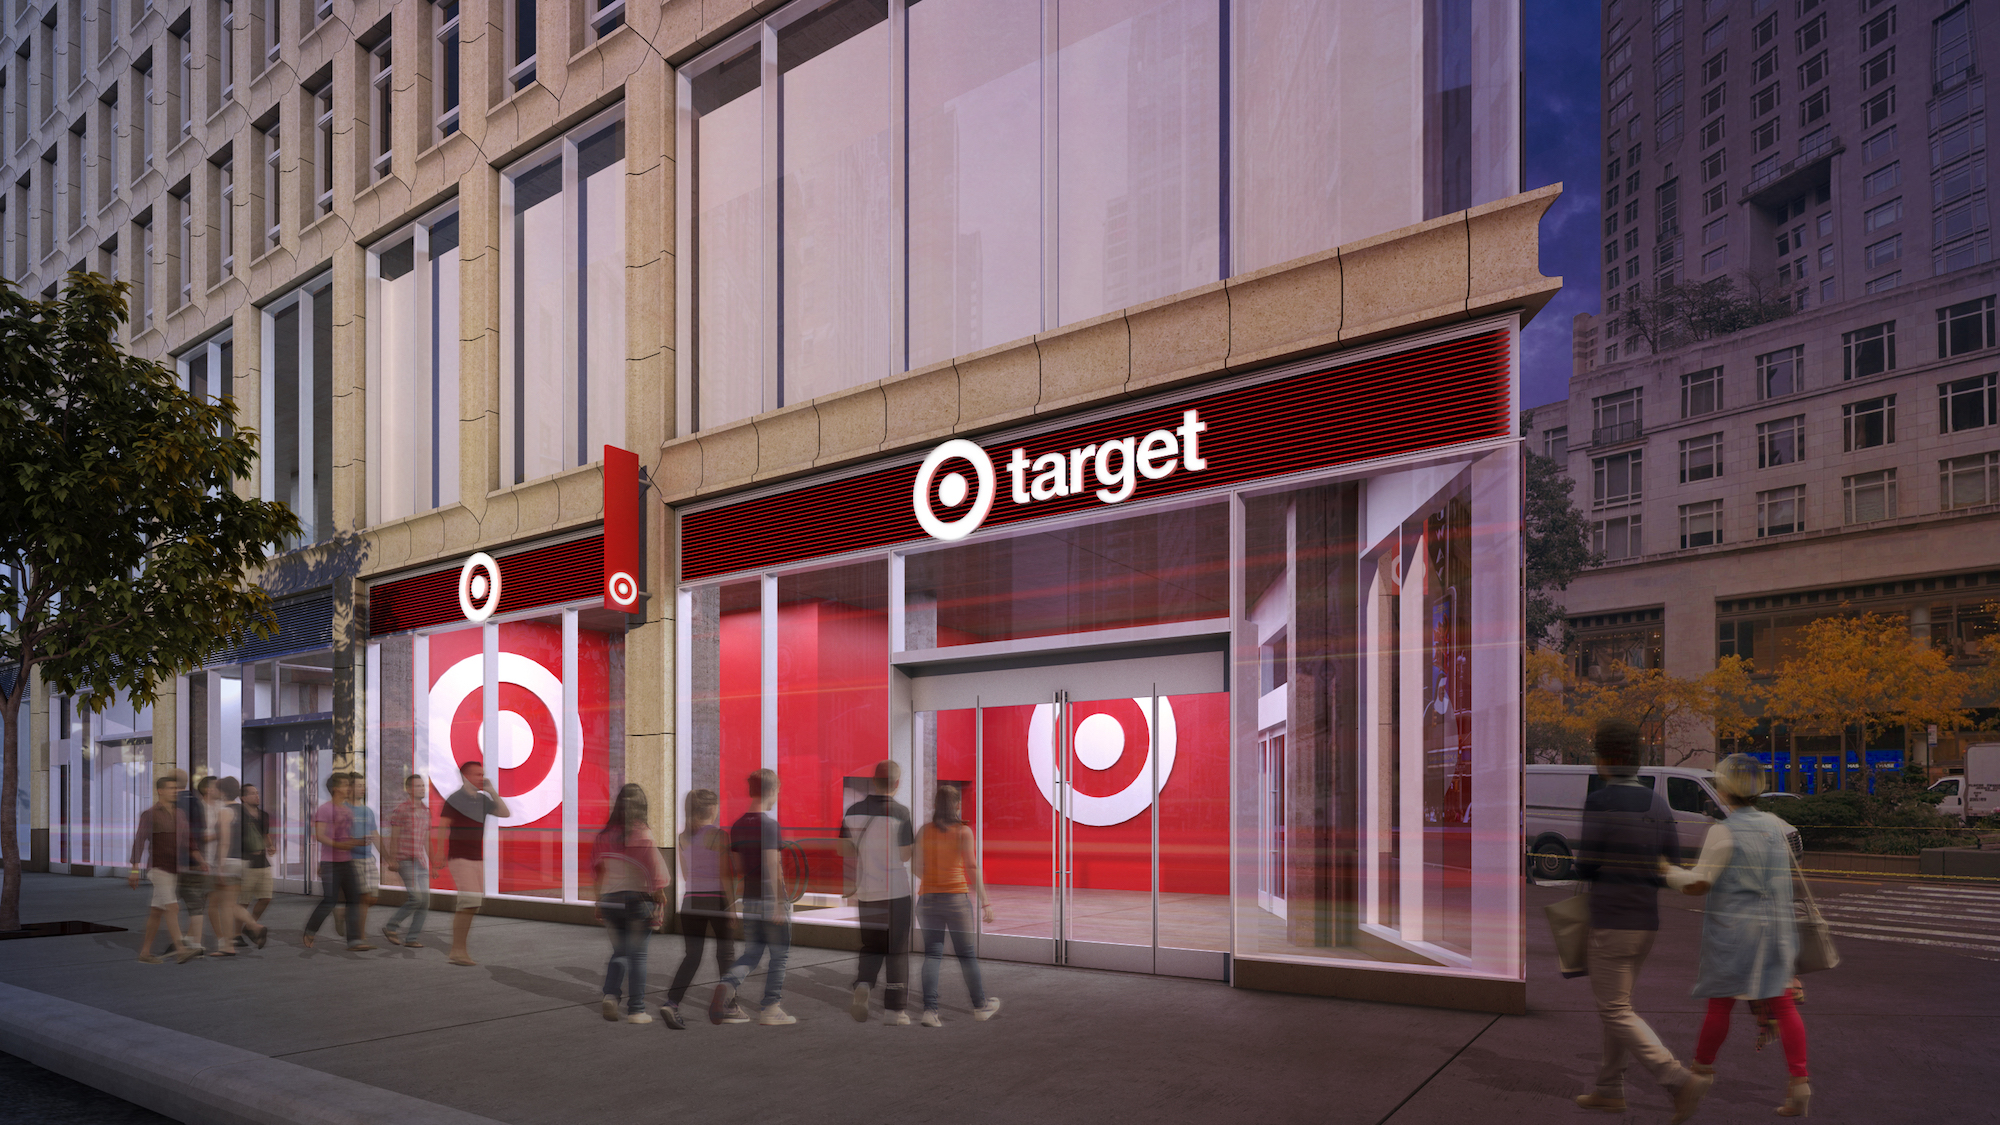 Columbus Circle is getting a ‘small-format’ Target next year